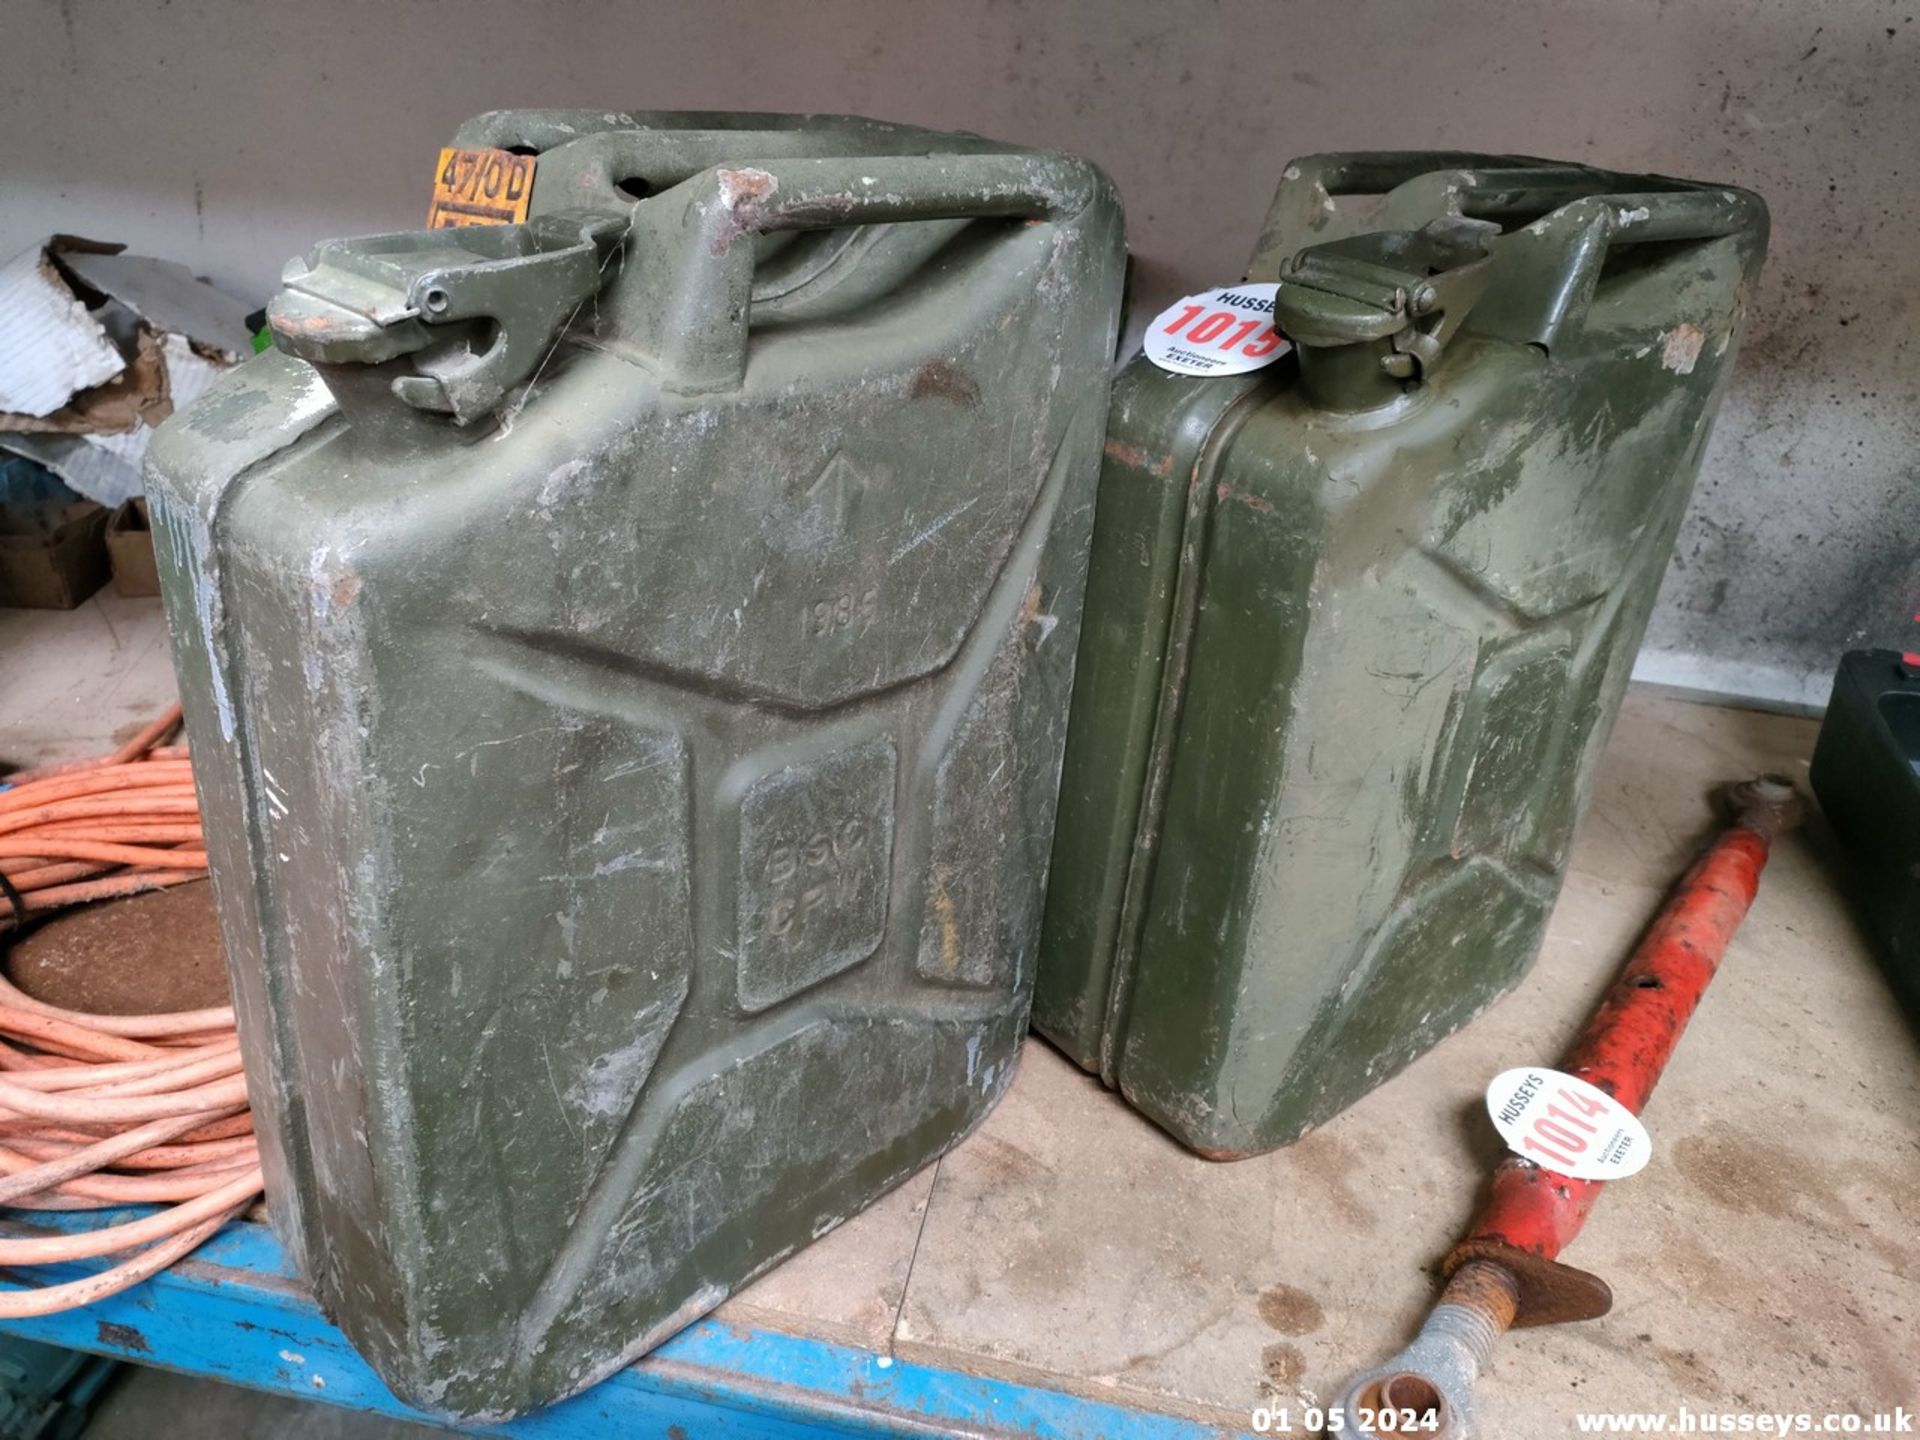 2 JERRY CANS